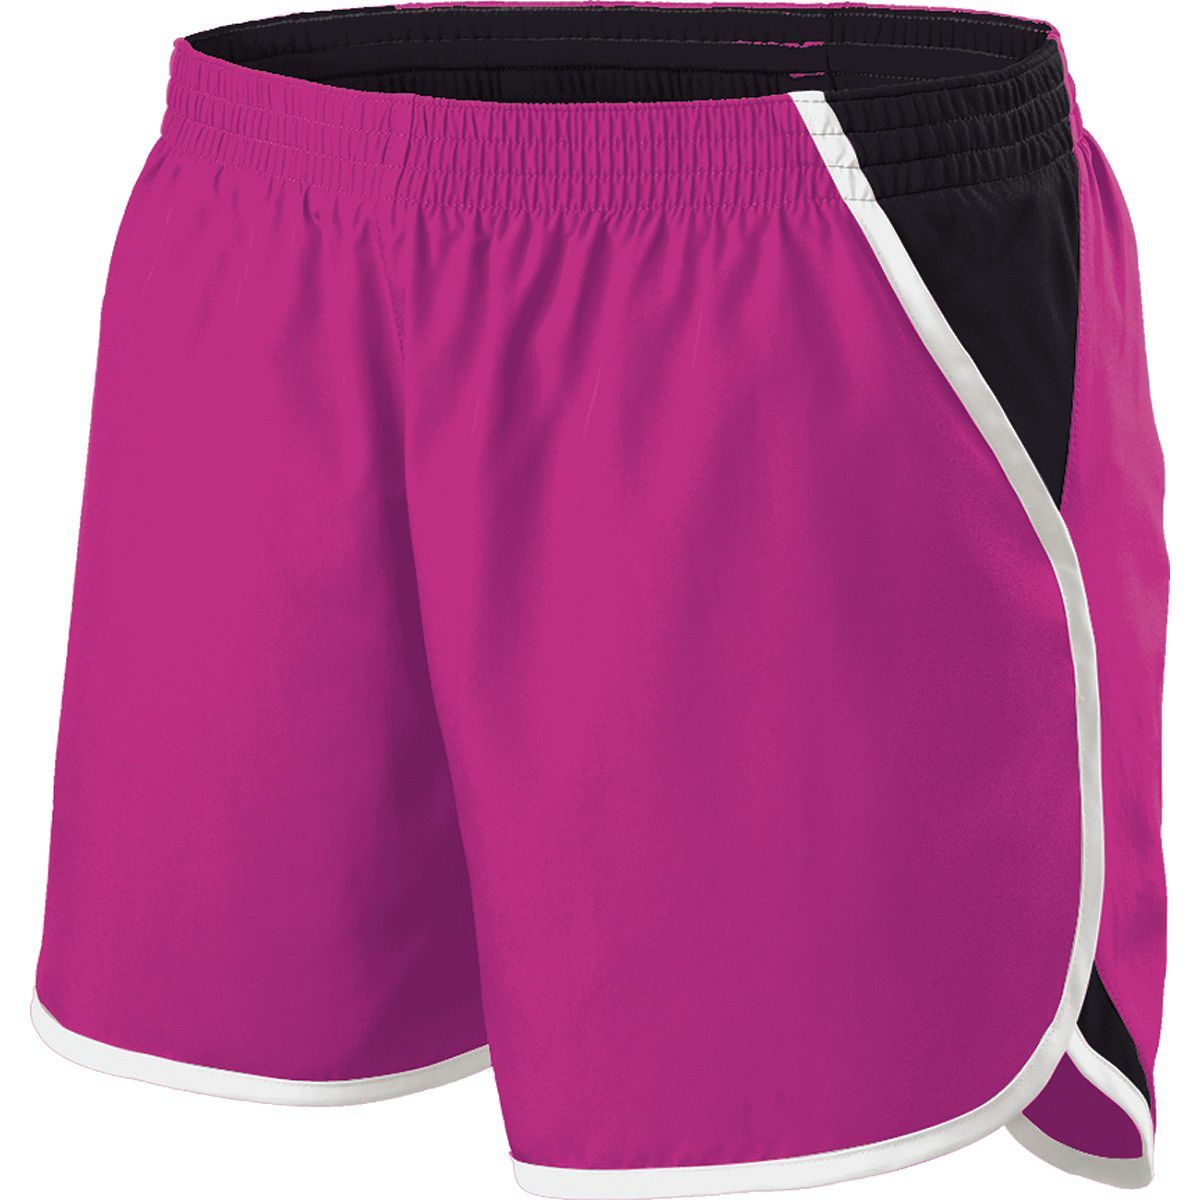 Holloway Energize Shorts in Power Pink/Black/White  -Part of the Ladies, Ladies-Shorts, Holloway product lines at KanaleyCreations.com